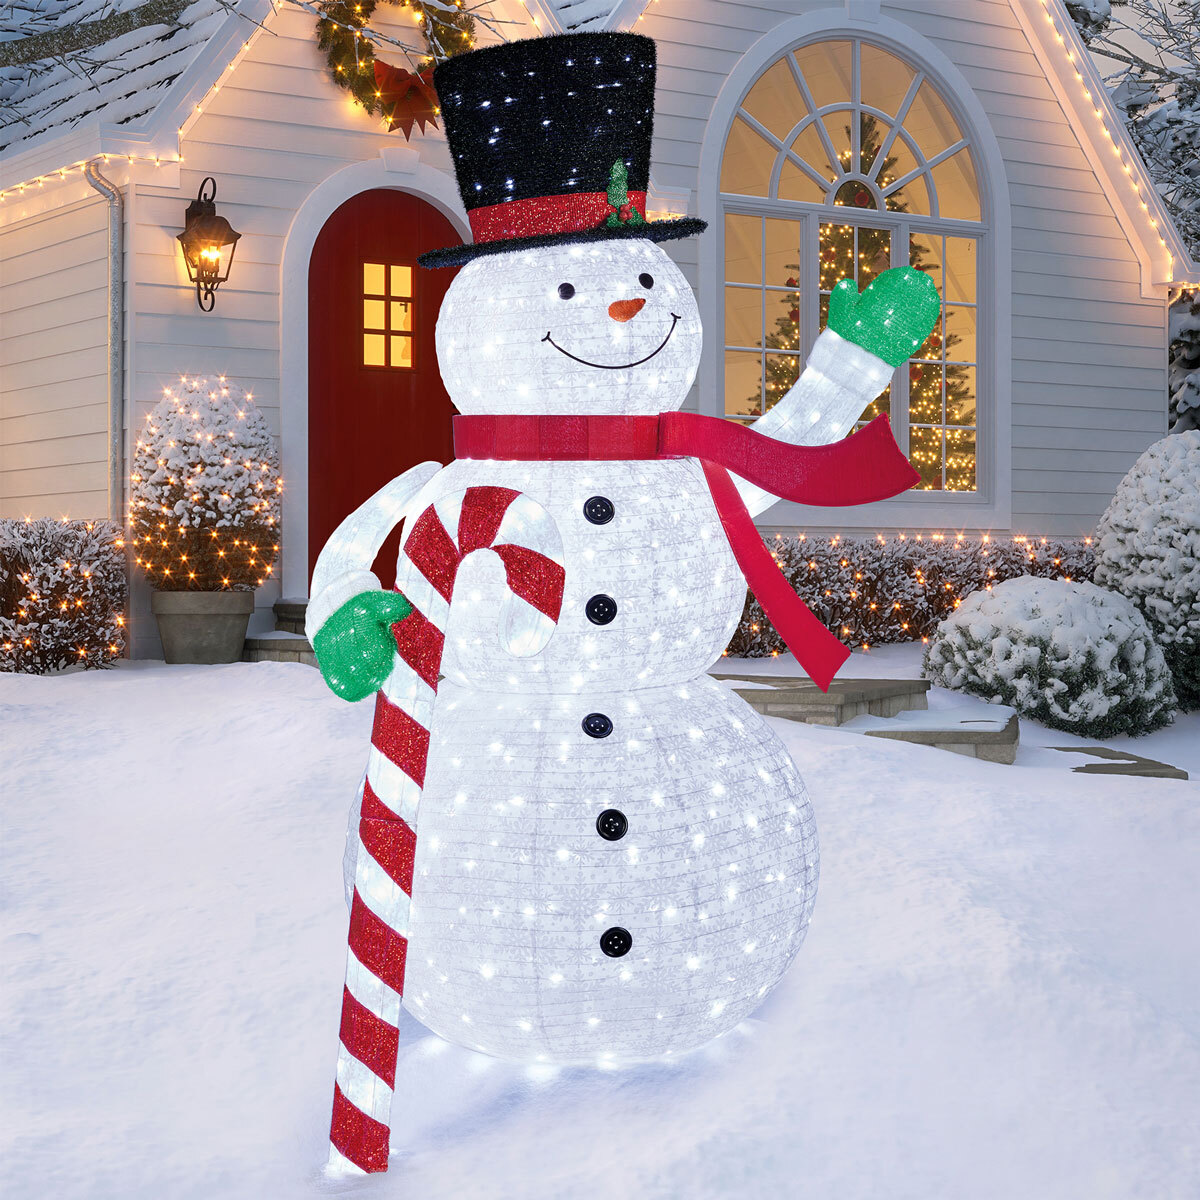 Buy 96" Pop-Up Snowman Lifestyle Image at Costco.co.uk